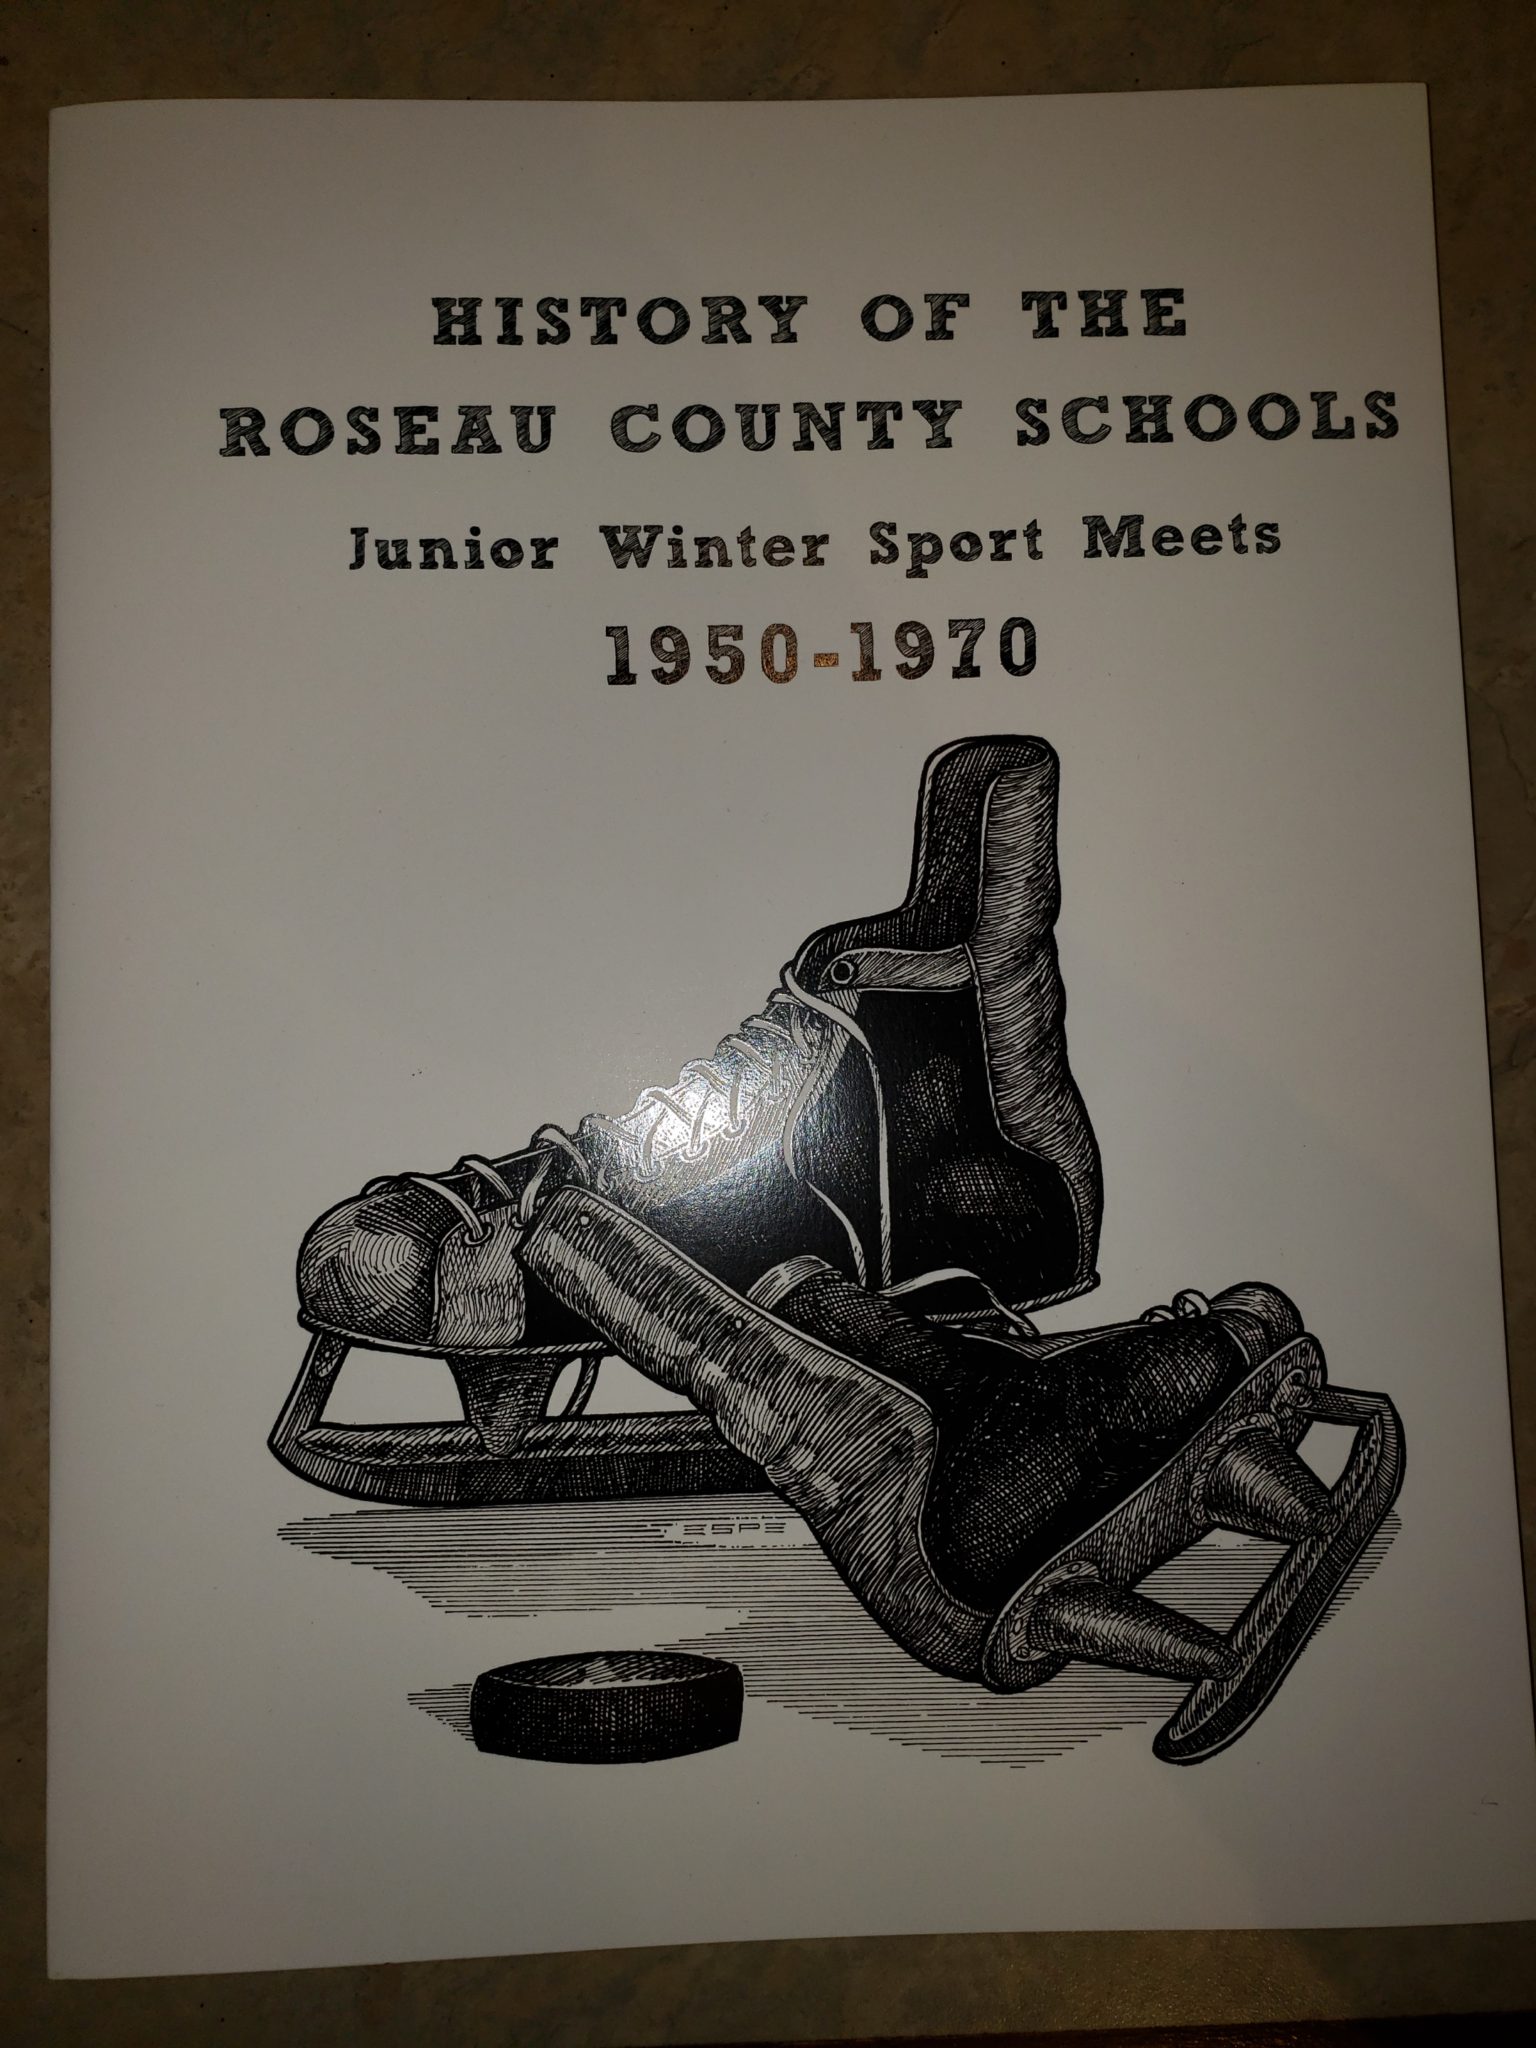 History of the Roseau County Schools - Junior Winter Sports Meets 1950-1970